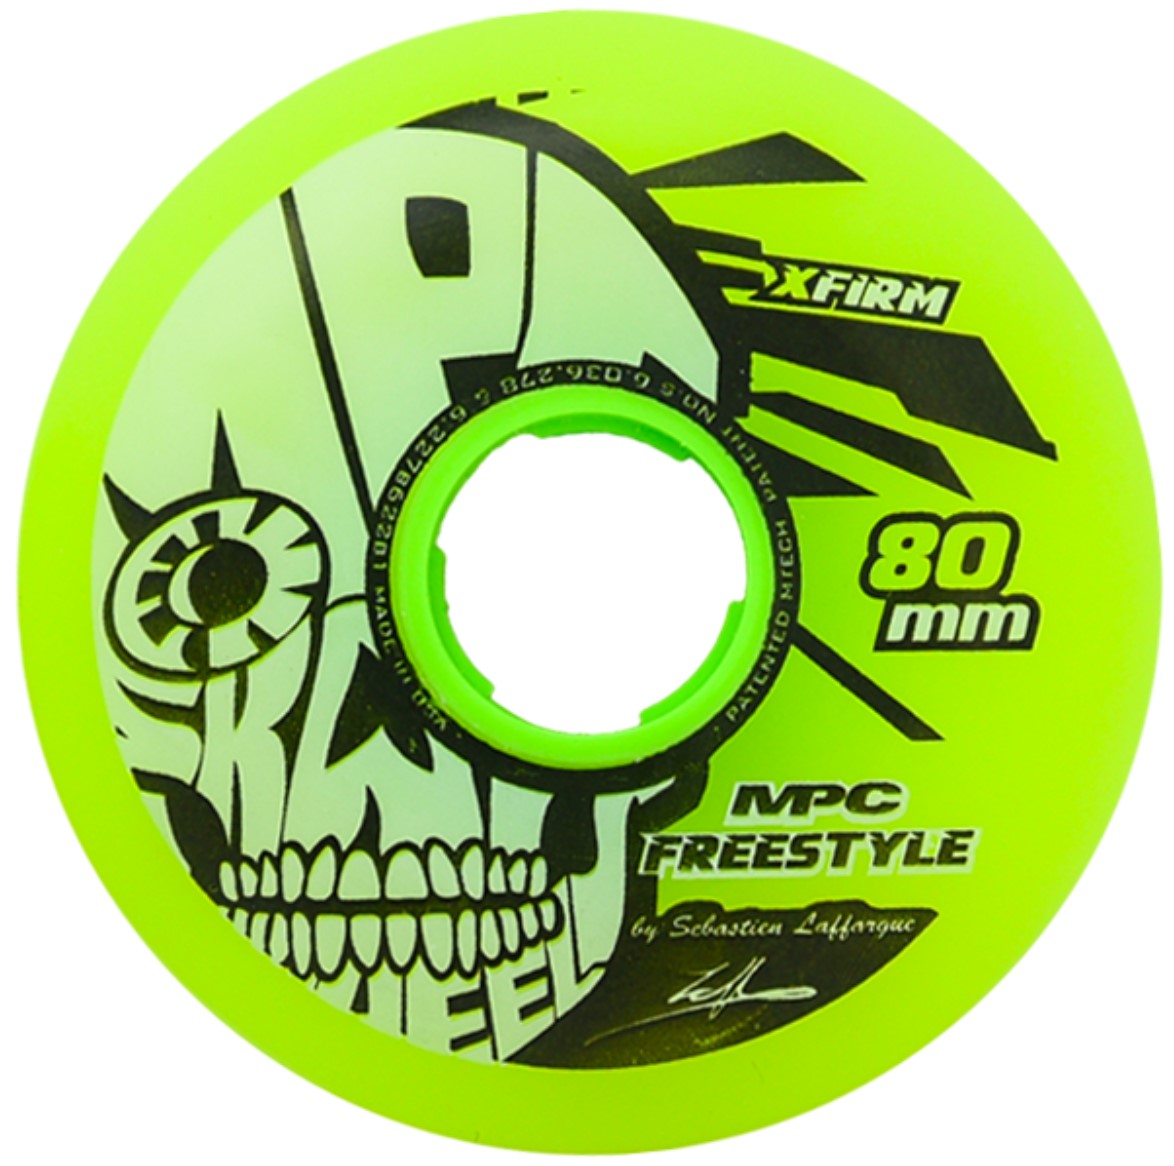 MPC Green Yellow X Firm Wheel of 80 mm that is perfect for freestyle slalom inlineskating